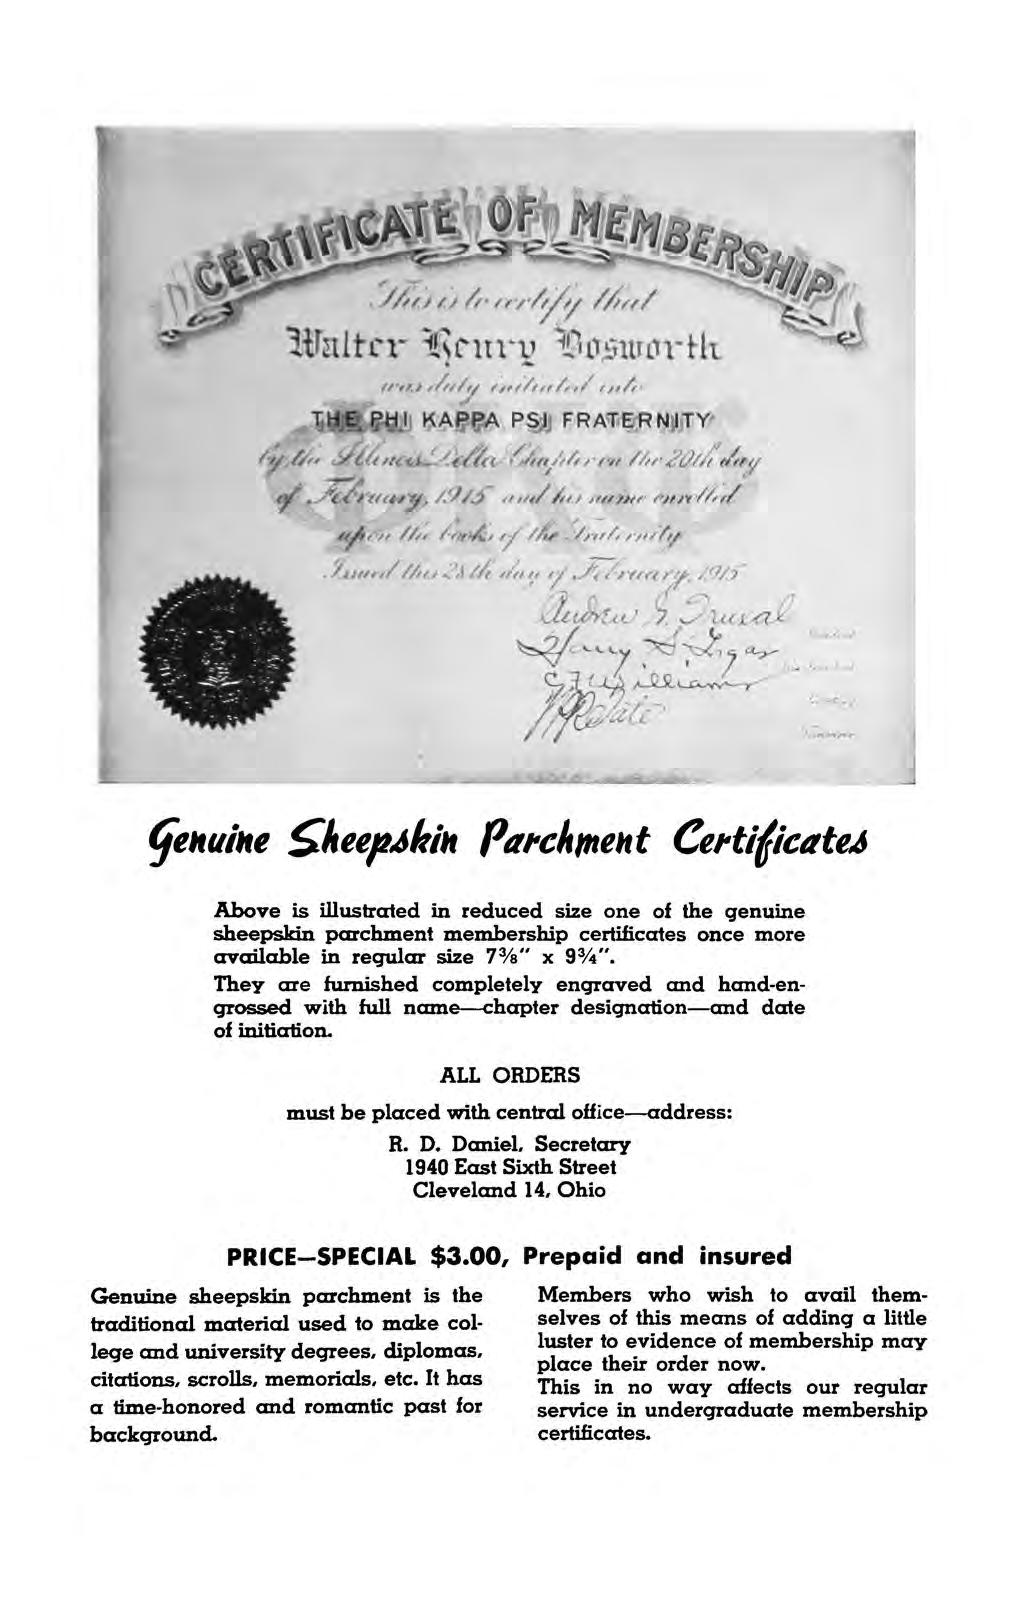 .dmm«a«miitafe,:< genuine ^keep^kin Pafchm^Ht Certificates Above is illustrated in reduced size one of the genuine sheepskin parchment membership certificates once more available in regular size 7%"